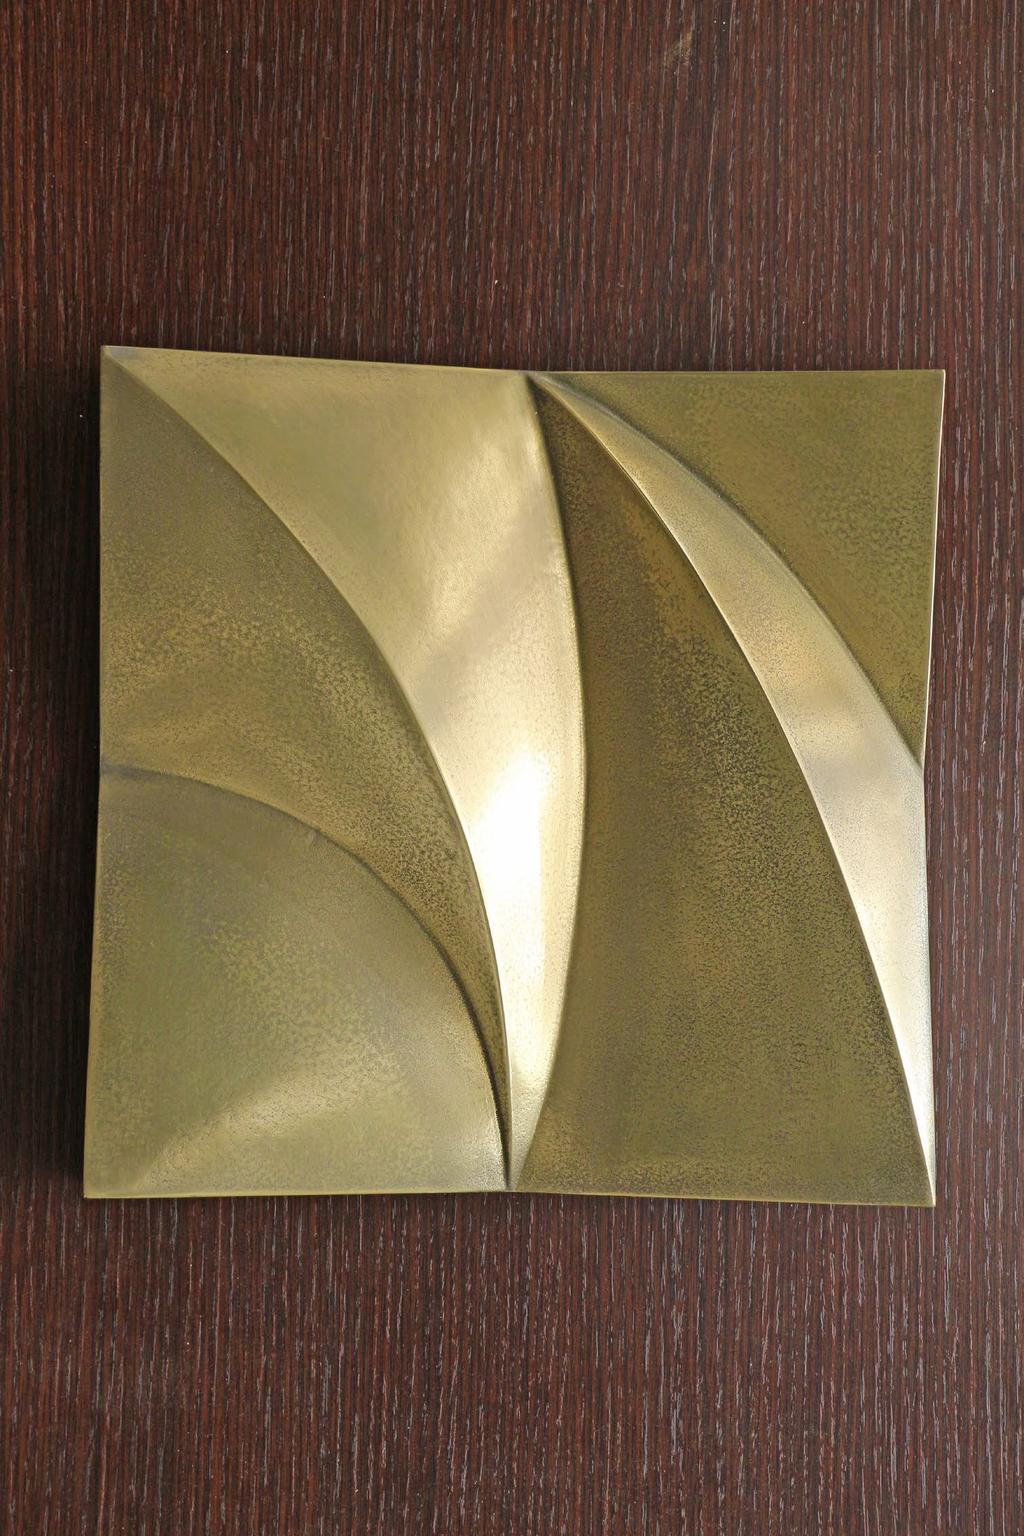 METAL FINISH Together with VeroMetal we offer a new type of contemporary wall and ceiling decoration. The result is 3D sculptures covered with metal.